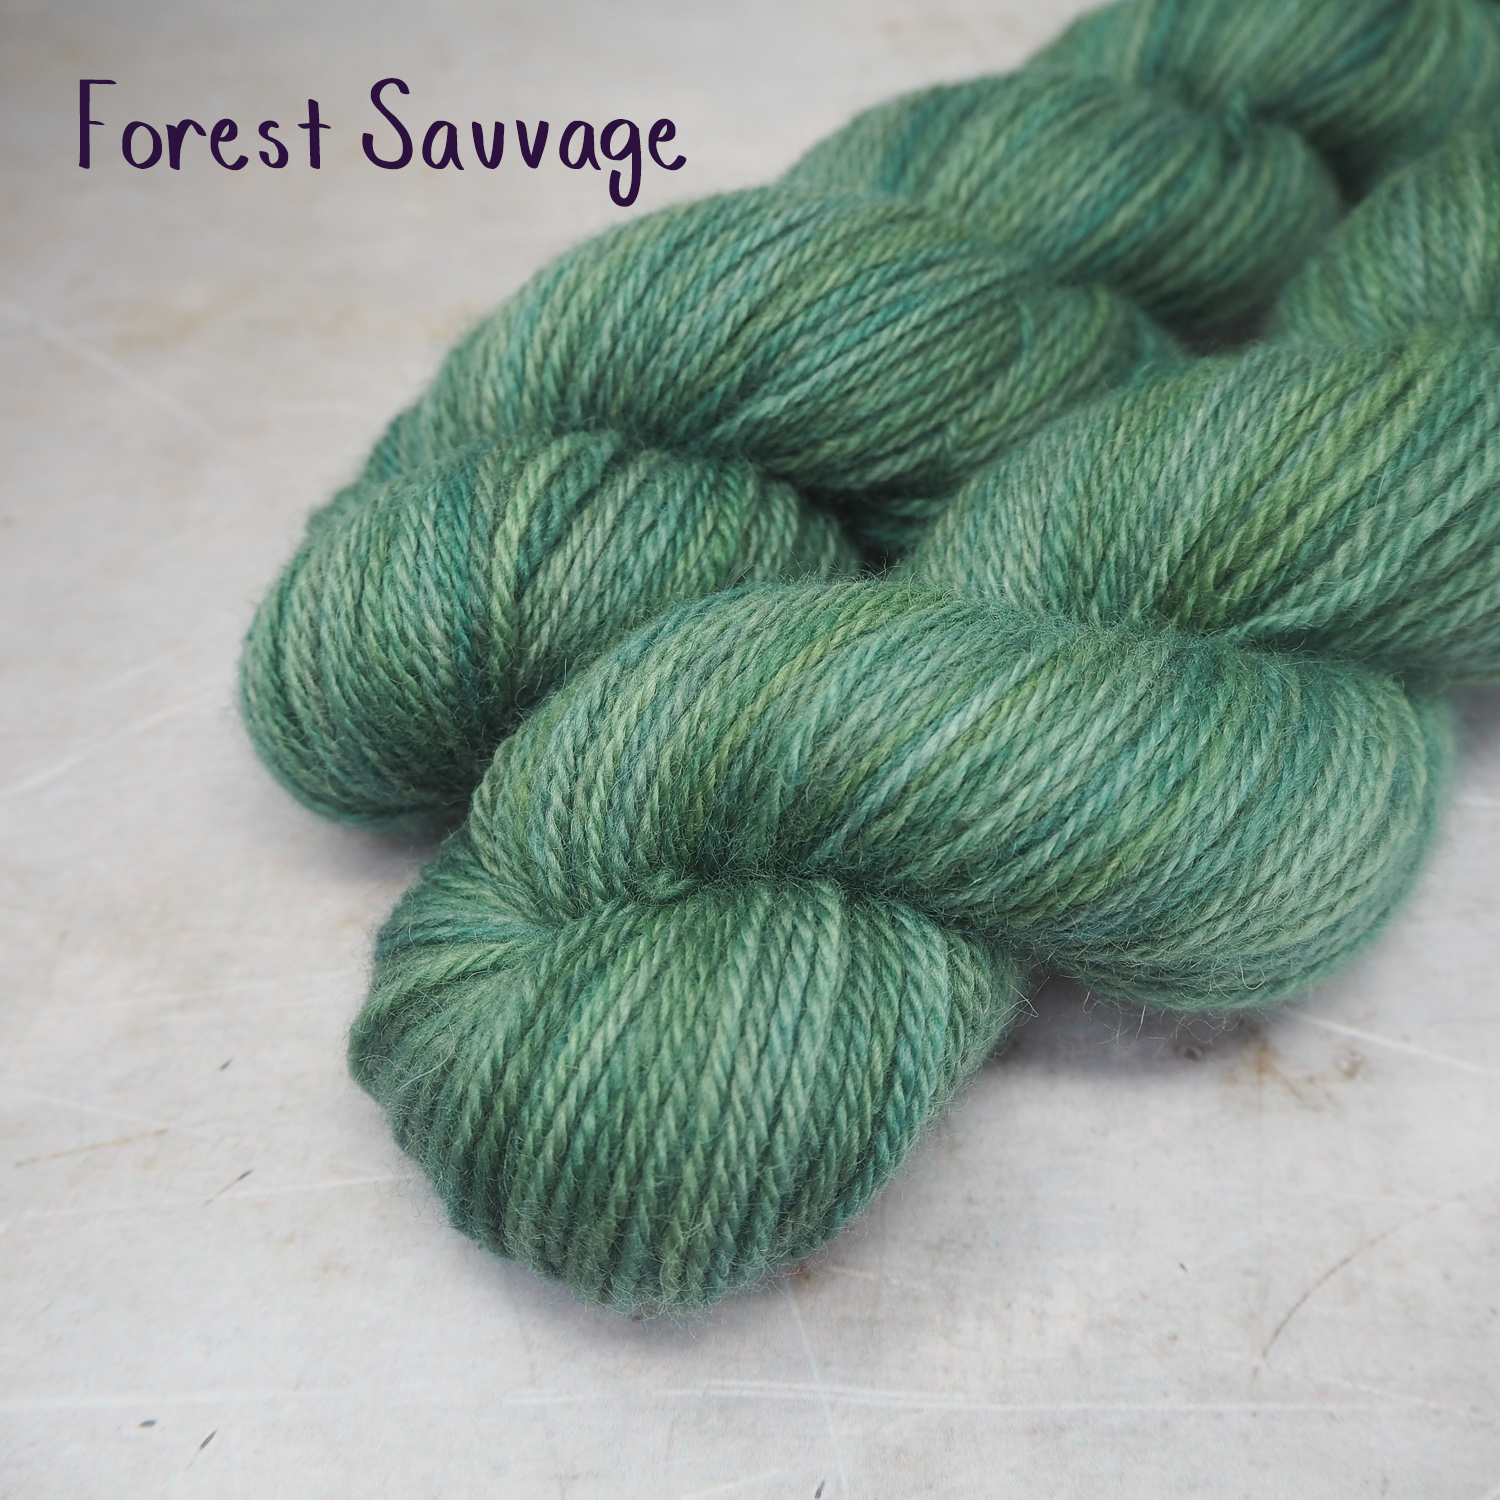 Two skeins of soft, DK-weight yarn, hand-dyed a in variegated forest greens. 